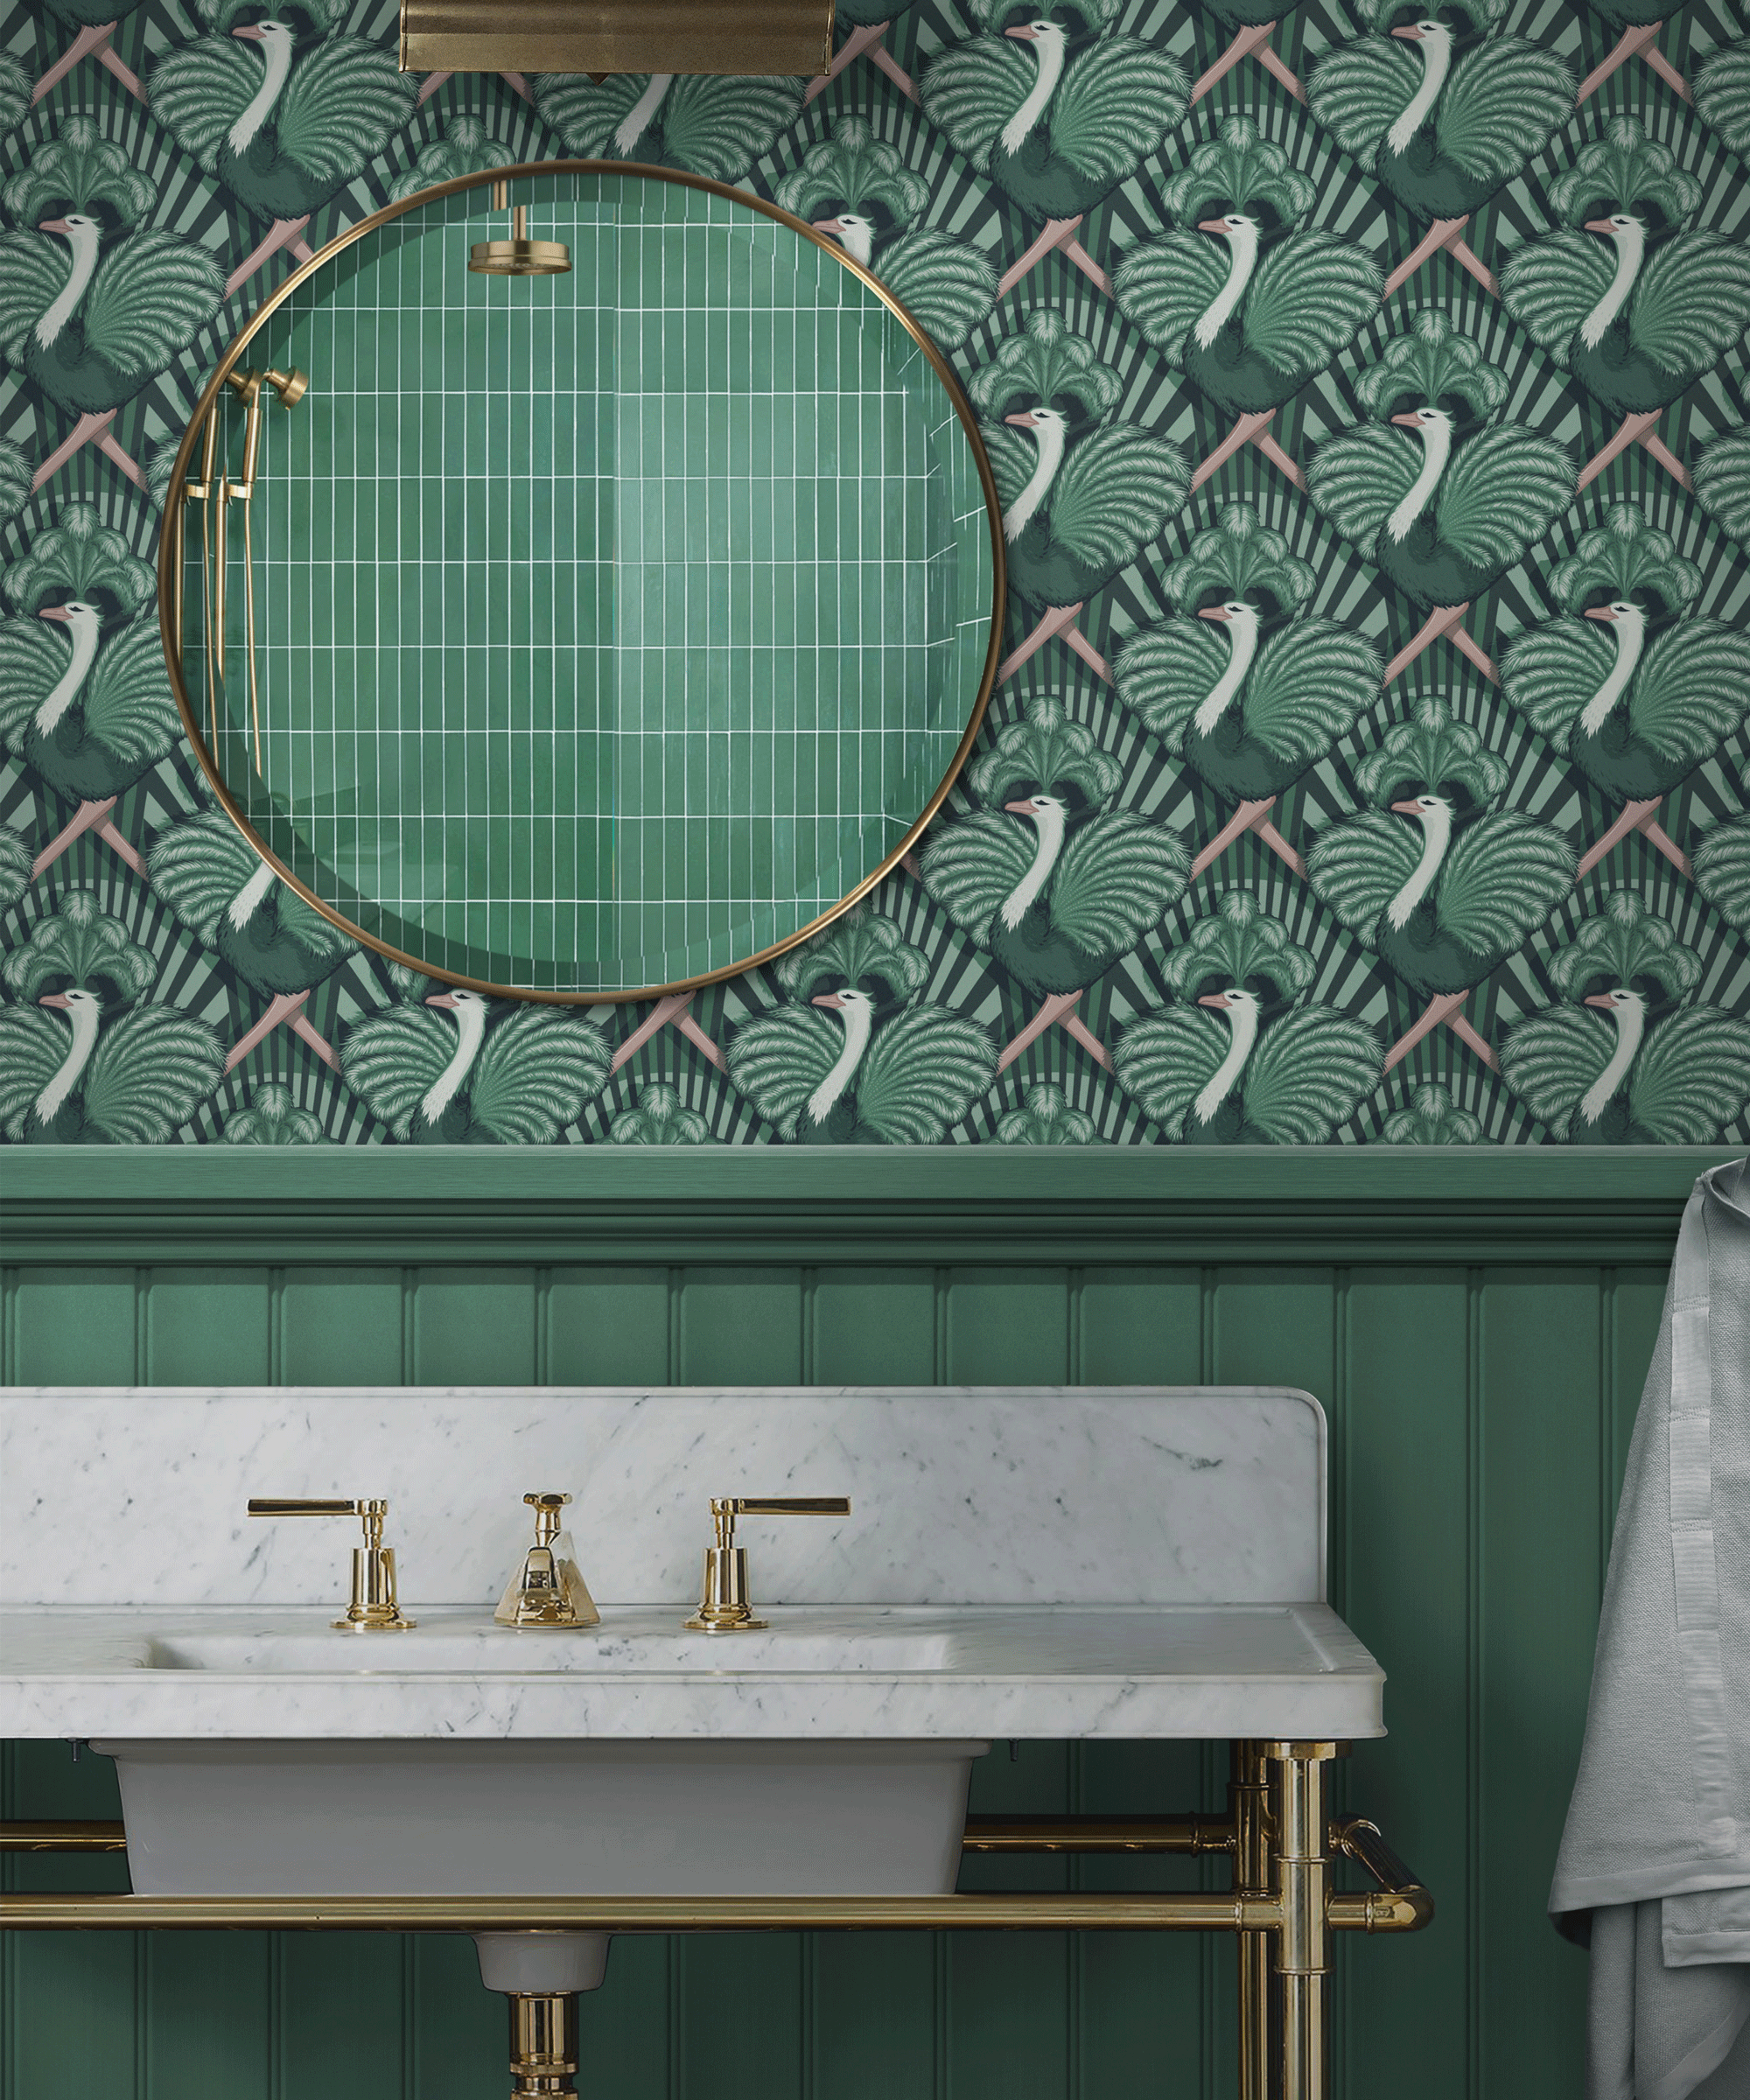 An example of bathroom wall ideas showing a bathroom with a marble sink in front of green peacock wallpaper